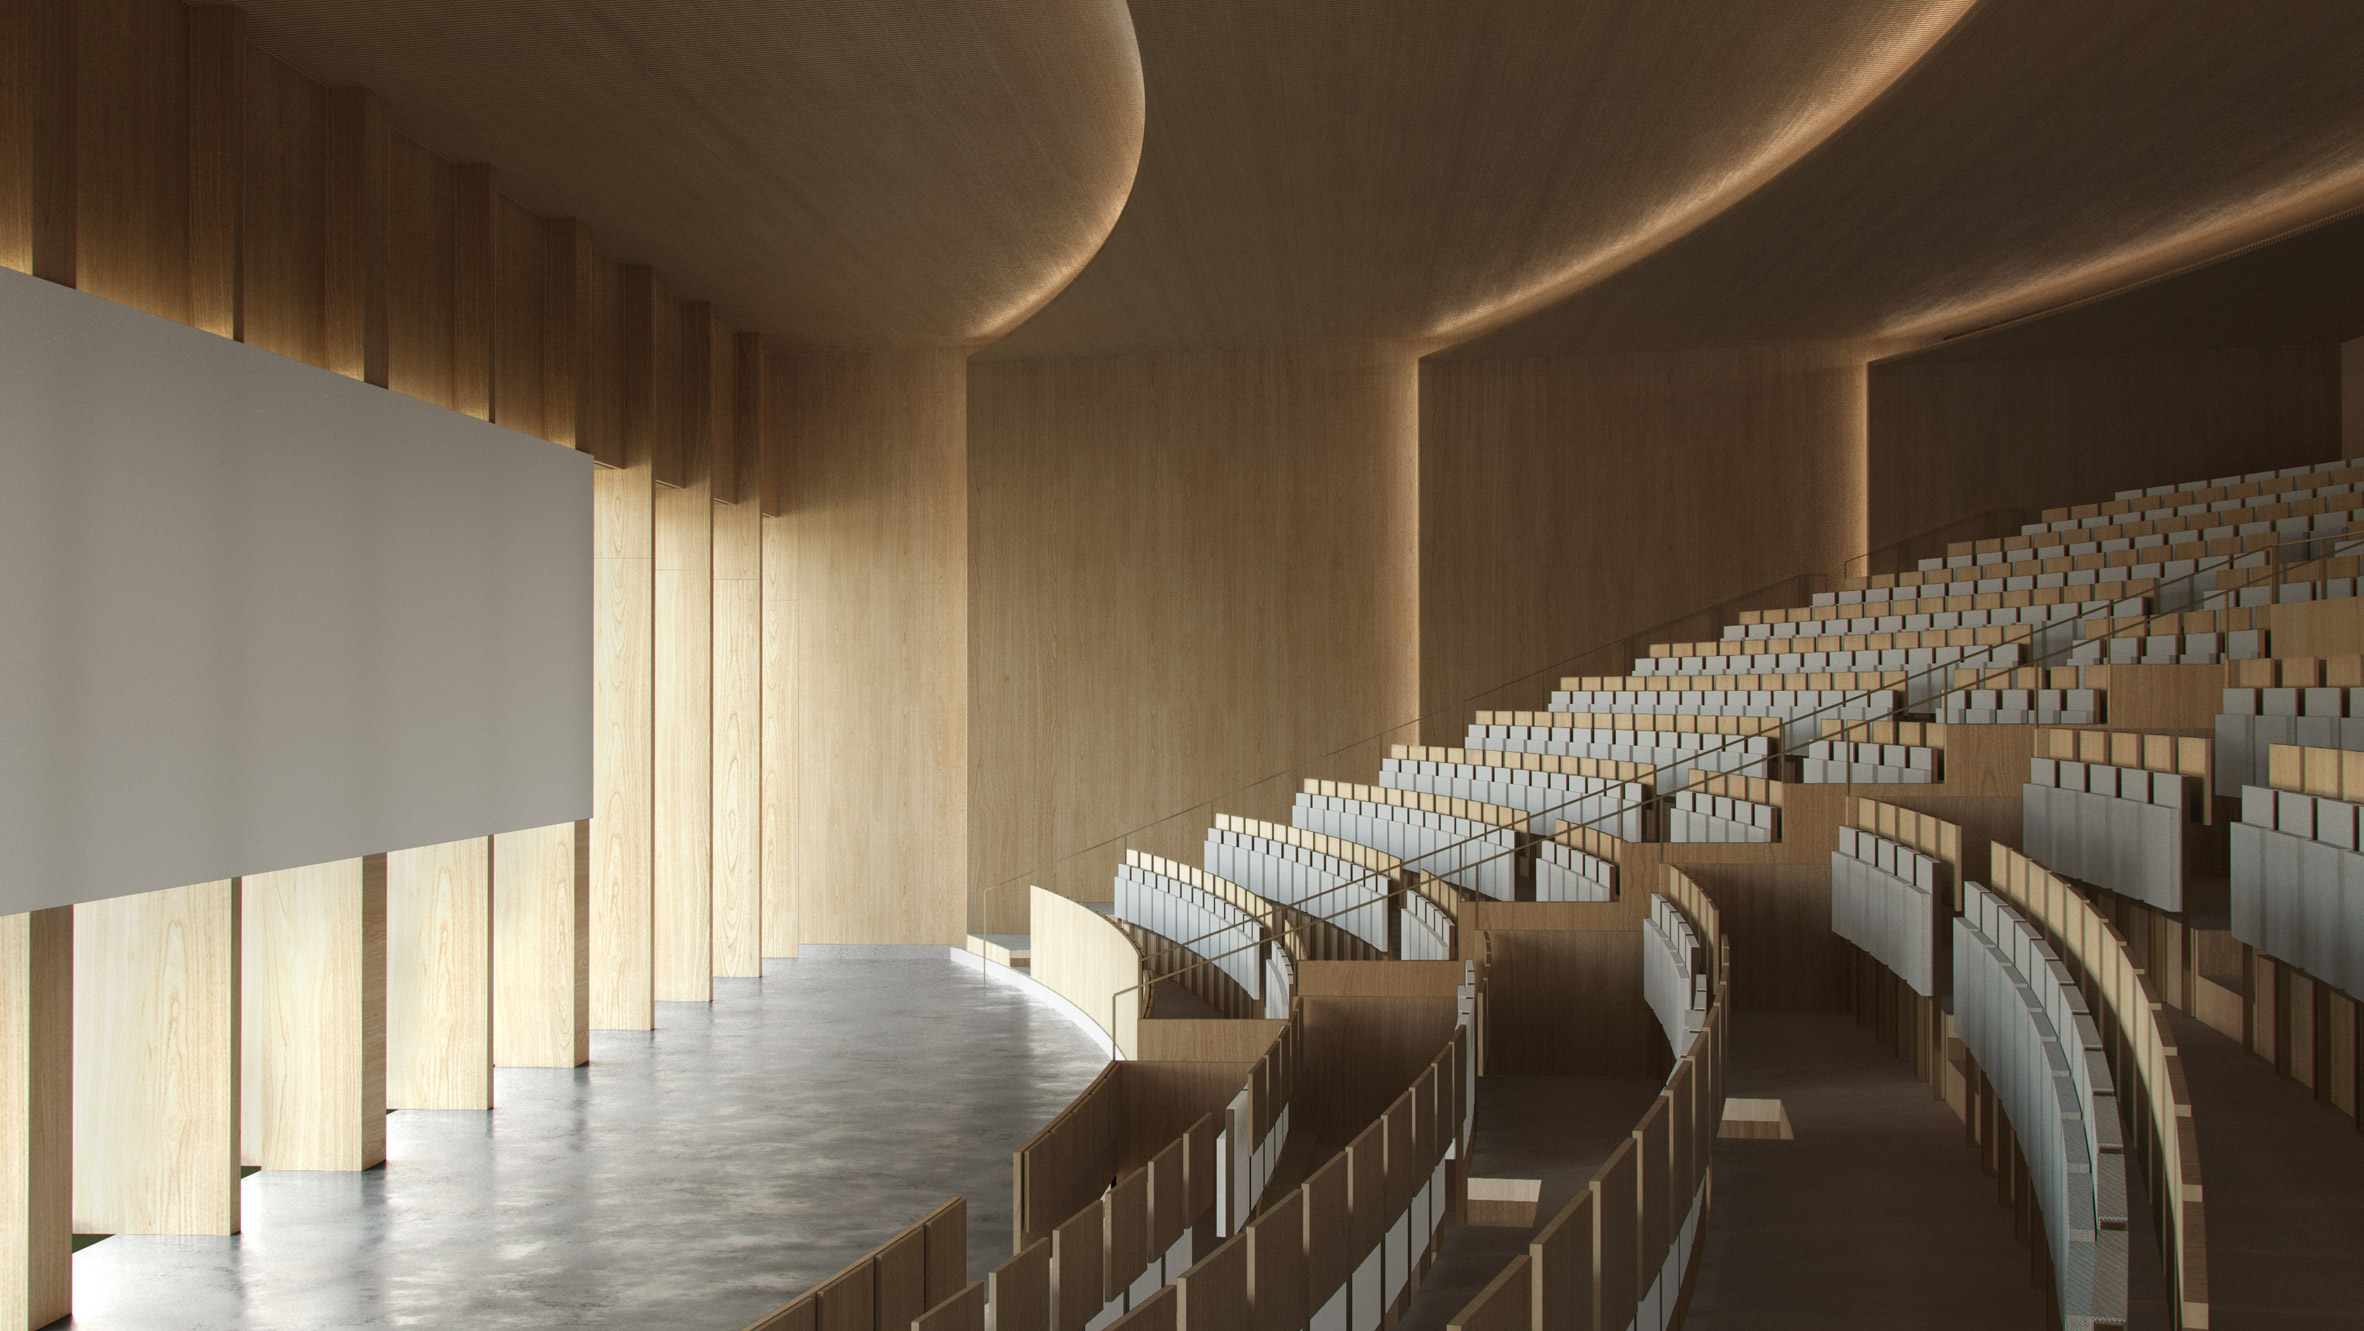 Timber lecture hall at Tilburg University with rows of curved seating looking down onto a screen lowered in front of floor-to-ceiling windows 